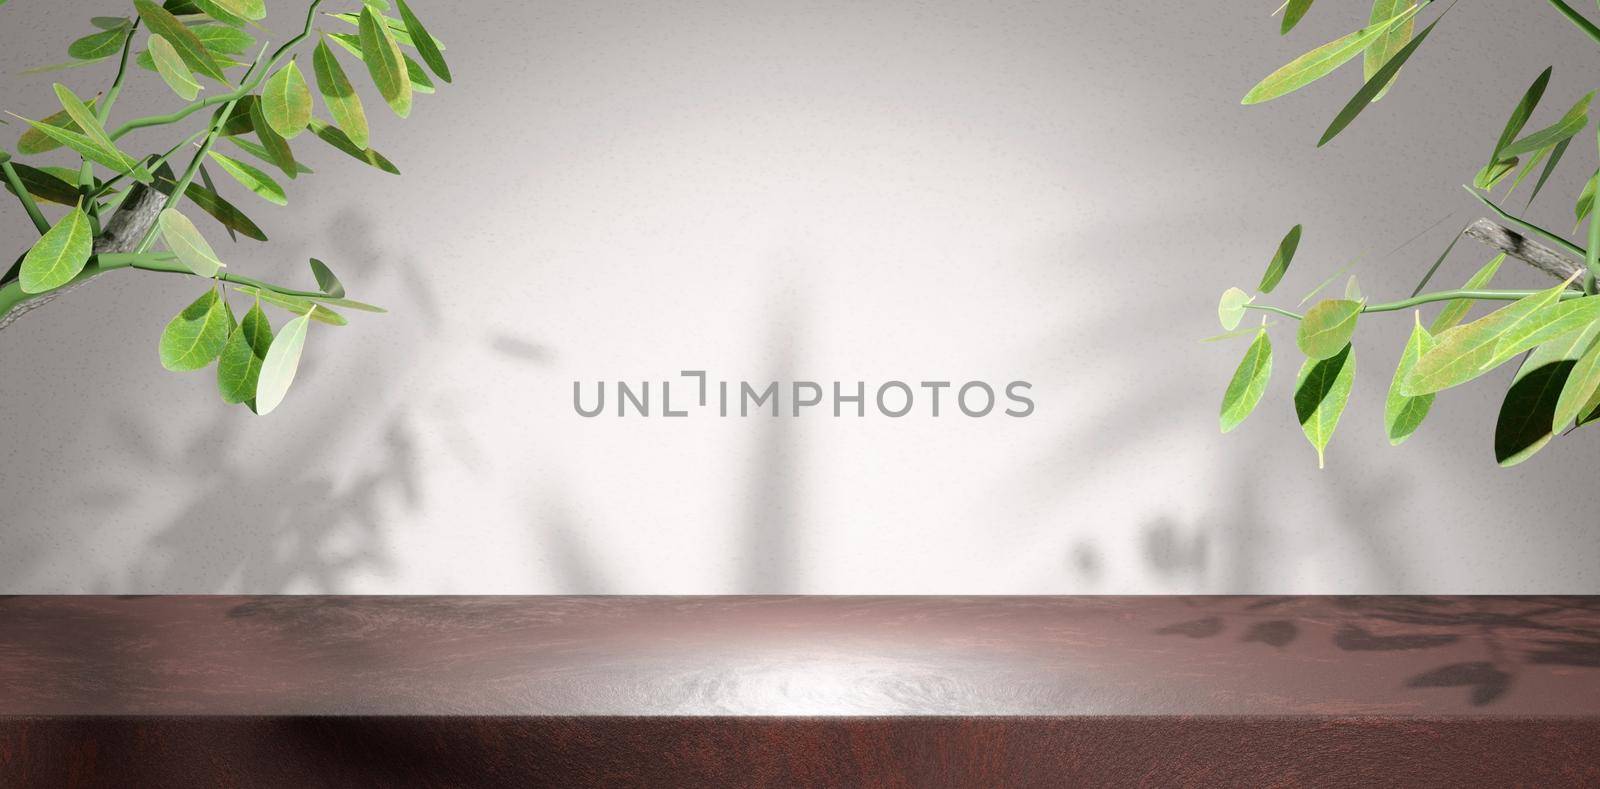 Empty Red Stone Table Top For Brand Exhibit. Abstract Plain Wall Background With Tropical Leaves On the Side And Shadow Leaf Effect. 3D Render